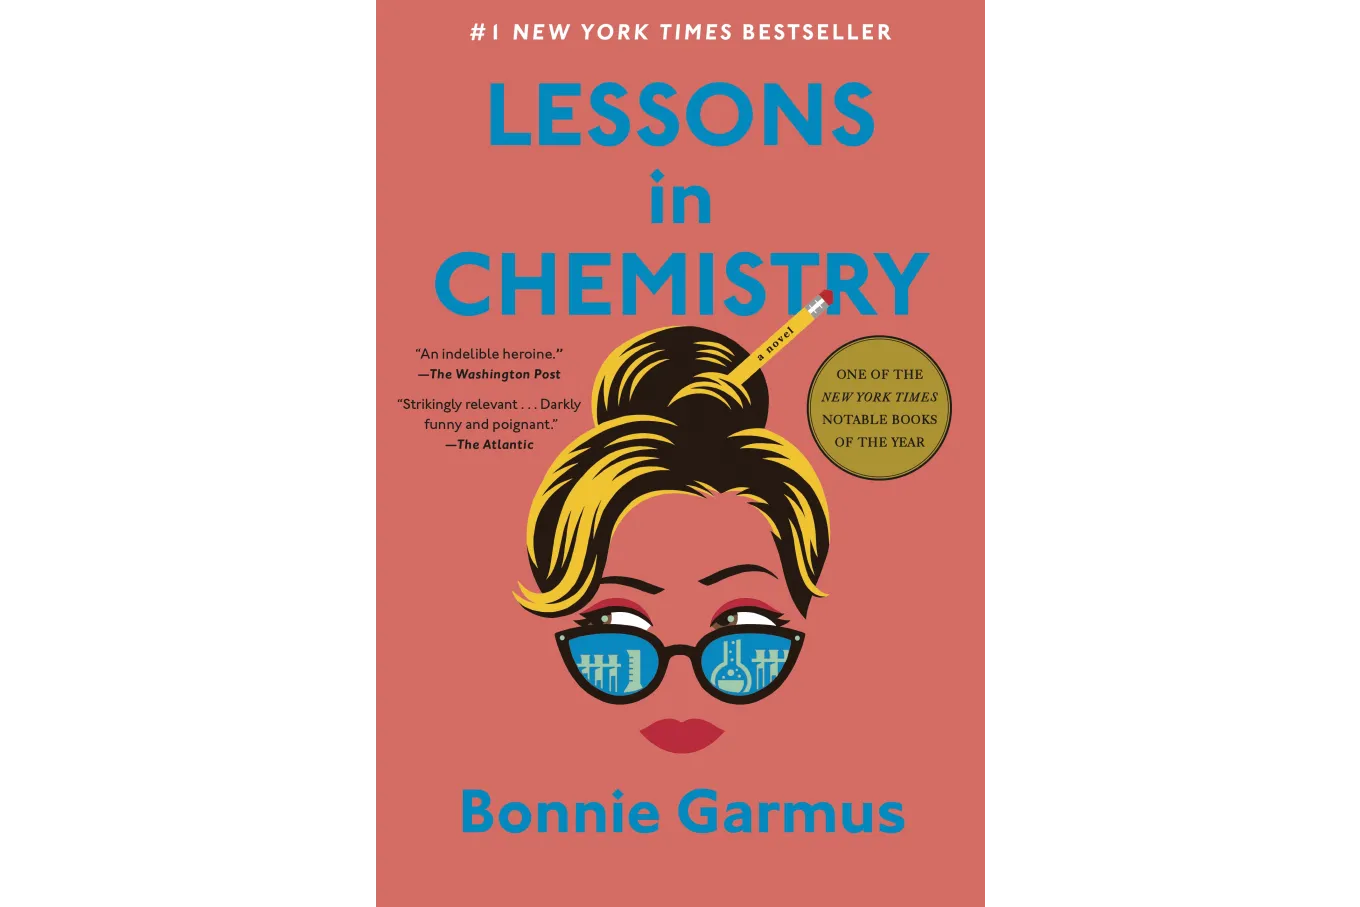 cover of Lessons in Chemistry with an orange cover and blue lettering. A drawn image of a blonde woman with sunglasses on is prominent.